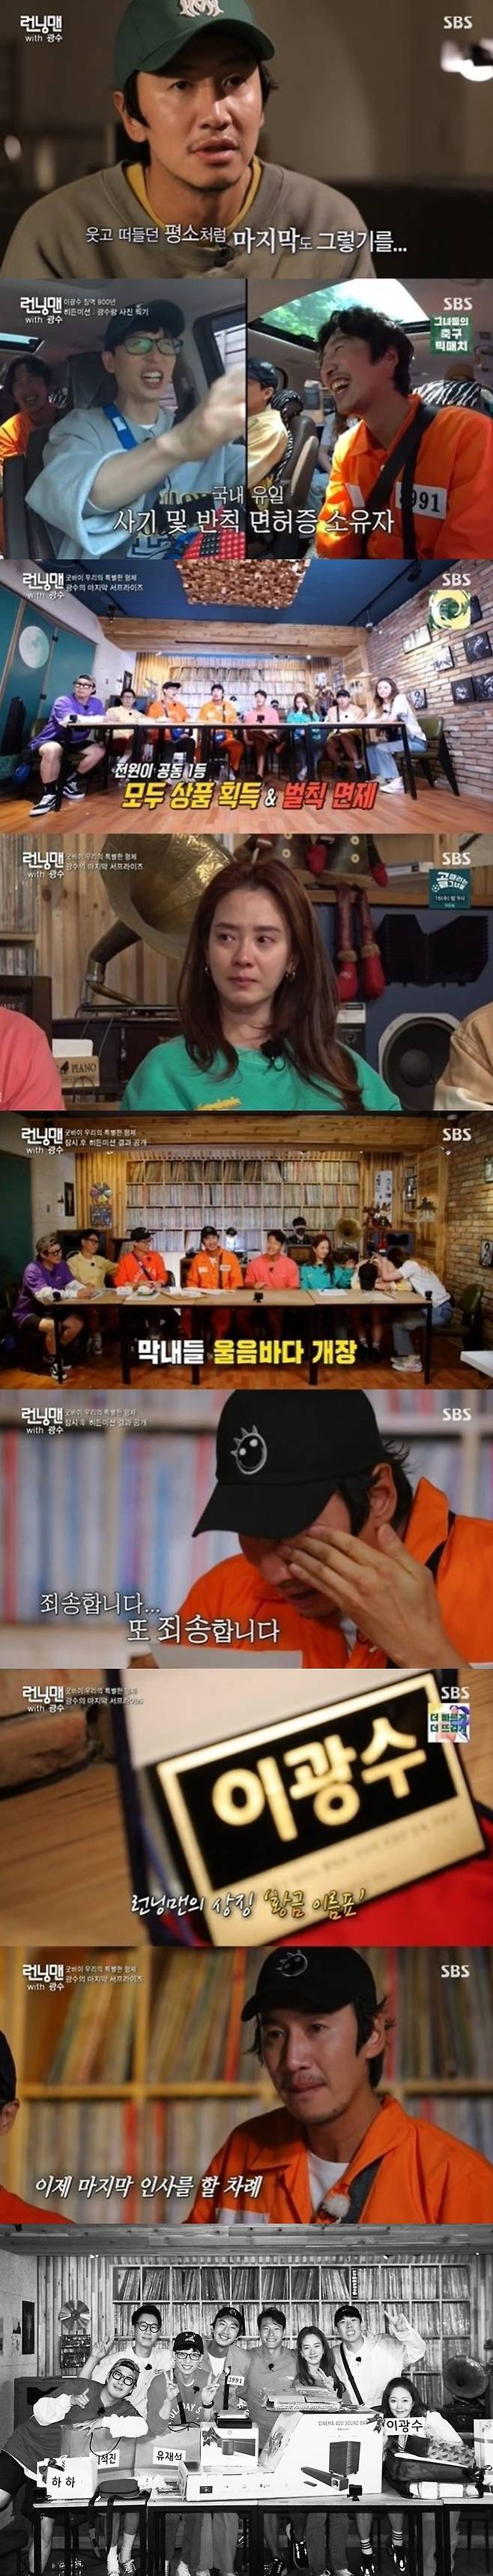 Seoul) = Lee Kwang-soo, who ran together for 3991 days, said goodbye to tears on SBS Running Man.Running Man, which was broadcast on the 13th, was decorated with Lee Kwang-soos last race My Special Brother.Lee Kwang-soo said, I want to do it like usual recording. SBS rooftop one, which was the first recording place of Running Man, and LP bar that members would like, were selected as the shooting place and planned the last recording directly.The production team invited a former judge to conduct a trial against Lee Kwang-soo, who had committed numerous betrayals in Running Man.Former judge Jung Jae-min said to Lee Kwang-soo, who committed a total of 3353 crimes, including 58 property losses, 353 assaults, 37 performances, 1812 frauds, and other misdemeanors.I will be sentenced to 1050 years in prison, the ruling said.The members had to help Lee Kwang-soos edification, and they had to carry out Lee Kwang-soo and take as many pictures as possible by receiving another mission secretly Lee Kwang-soo.It was the last recording of Lee Kwang-soo, but all the members showed Running Man down separation method with Lee Kwang-soo Moll from the beginning.Yoo Jae-Suk said: Think again, suddenly sorry and get off and overturn.Still, viewers will understand, he said, and on the outdoor pork belly menu, he said, Lets just go in today and get off next time. But in the end, the last was a tear-sea: Lee Kwang-soo didnt read the letters prepared by the members; Kim Jong-guk said, I dont know what was so enjoyable.As we were, we seemed to be one forever. Lets go together for the rest of our lives. Haha said, I was troubled.Now I will pray that I will make fun of someone, cheat with someone, talk with someone all night, and achieve a dream that will shine and achieve wonderfully anywhere. Yoo Jae-Suk added: I dont know who Im going to have to stop talking to and ask who to ride my neck, thank you, I wasnt bored because of you.Lee Kwang-soo said, I am so sorry for letting me feel now and making me feel another family. I did not do well for 11 years, but I did my best every week.Running Man I would like to ask for your love and interest in the future. Meanwhile, there was Hidden Mission at the race on the day.The members were Lee Kwang-soo and the most photographed, first and gift acquisition, and Lee Kwang-soos Hidden mission was Make all members the first place.In a warm happy ending, Lee Kwang-soo delivered a gift to the members, and the production team also presented Lee Kwang-soo with a golden name tag, a photo album with the last recording, and a speaker that he wanted to have.